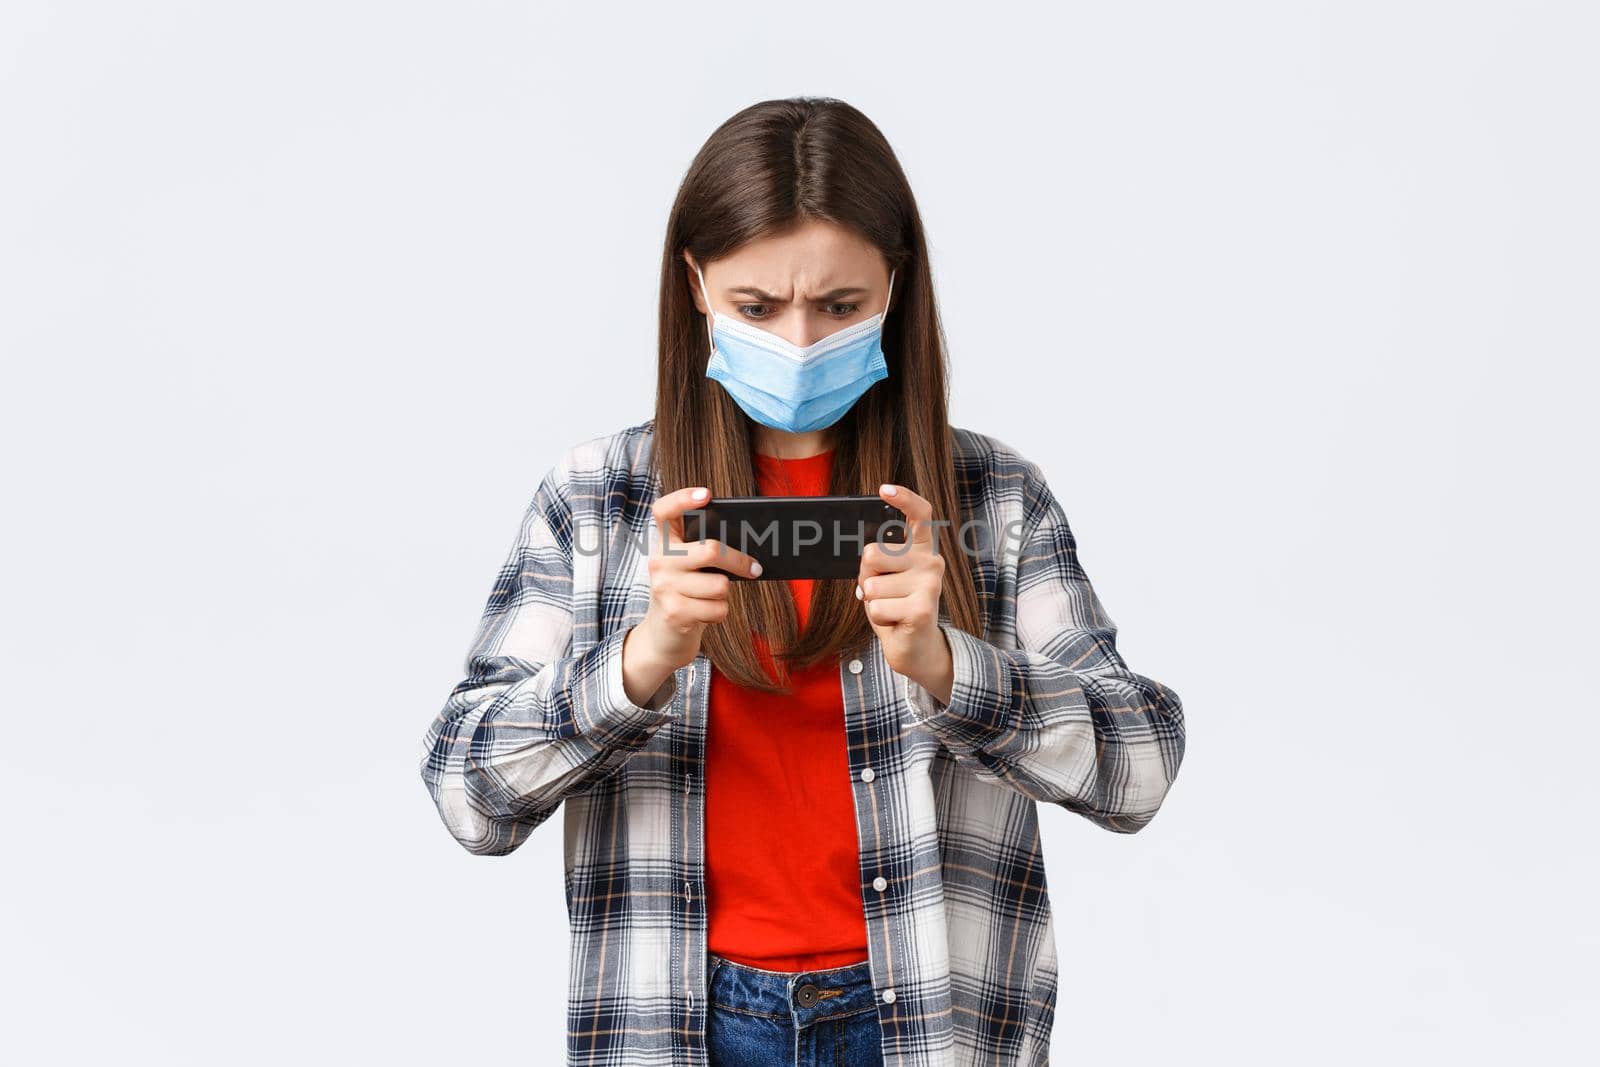 Different emotions, covid-19 pandemic, coronavirus self-quarantine and social distancing concept. Serious focused young girl in medical mask trying pass level in mobile game, tap screen and frowning.